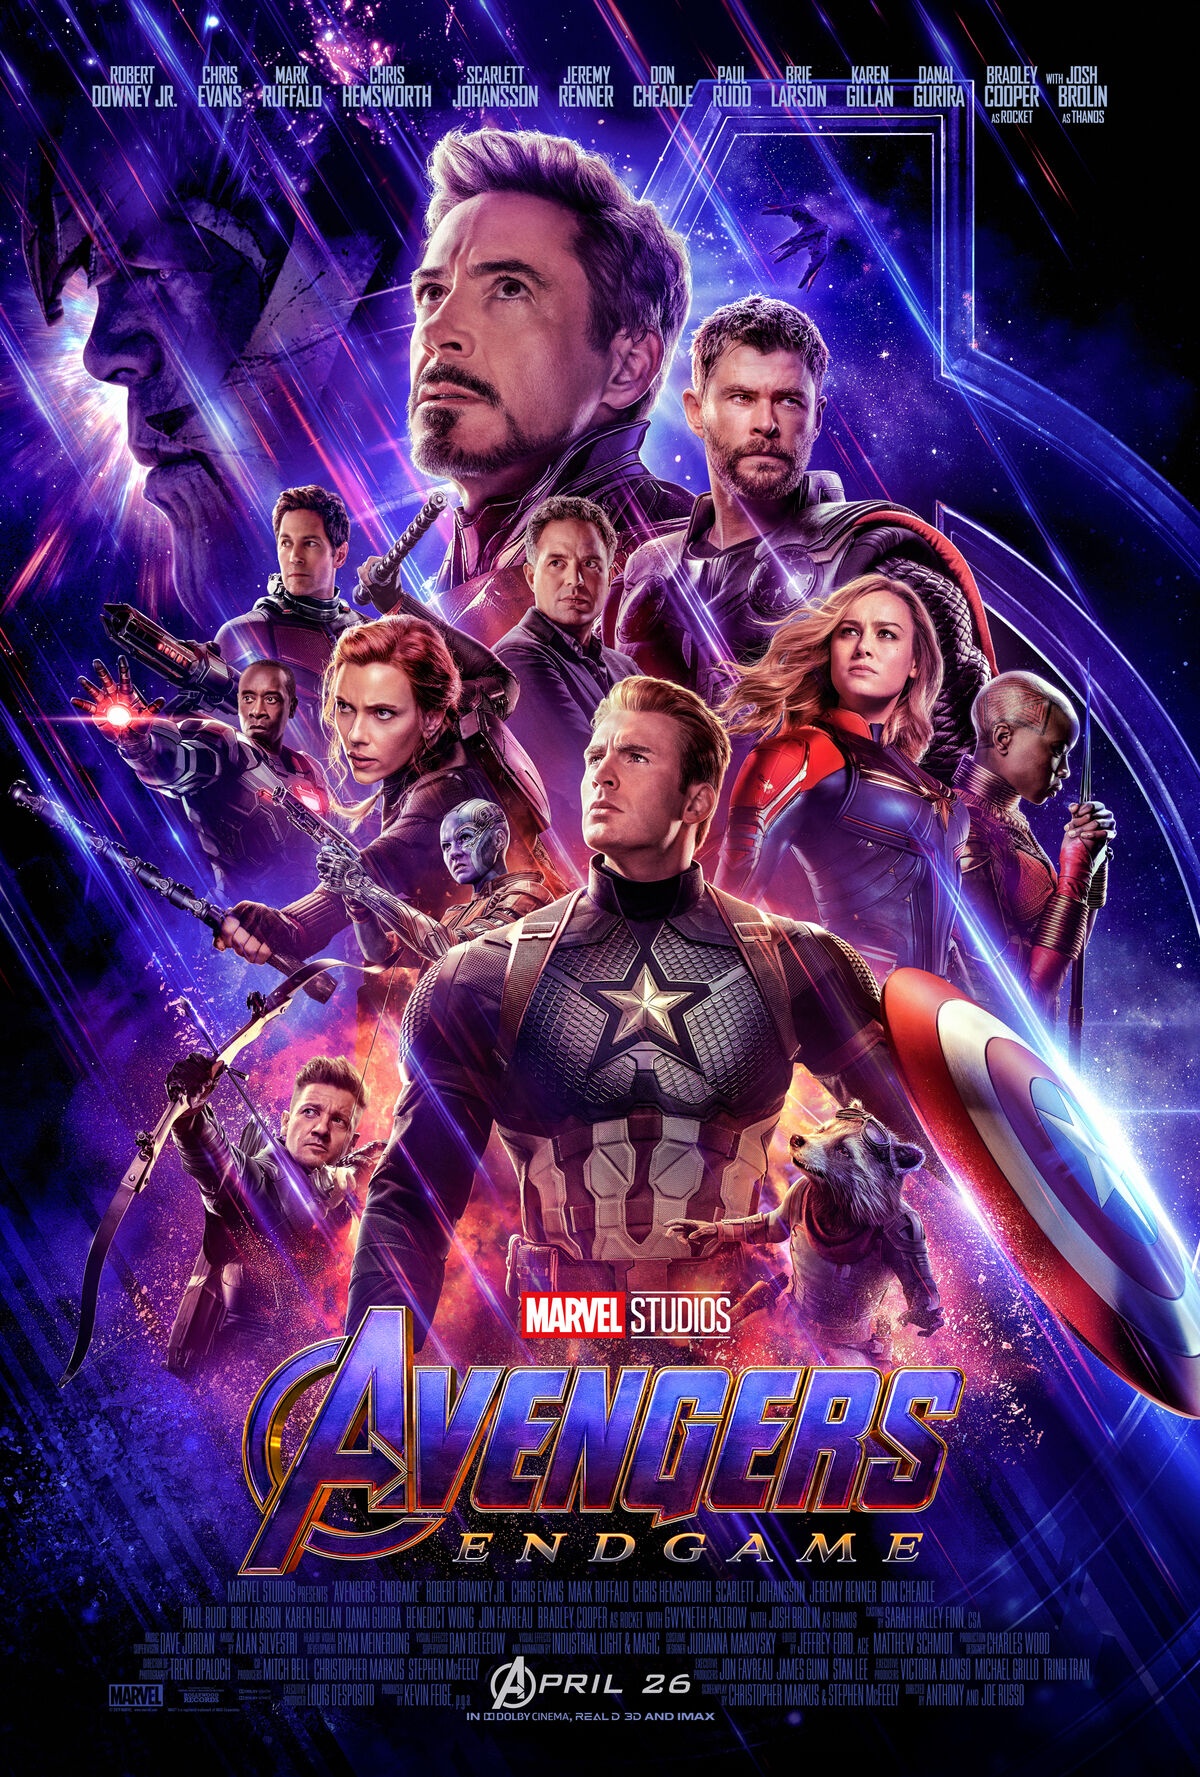 Avengers: Endgame, Meet the Cast, FULL guide to actors and characters in  Marvel's massive movie sequel